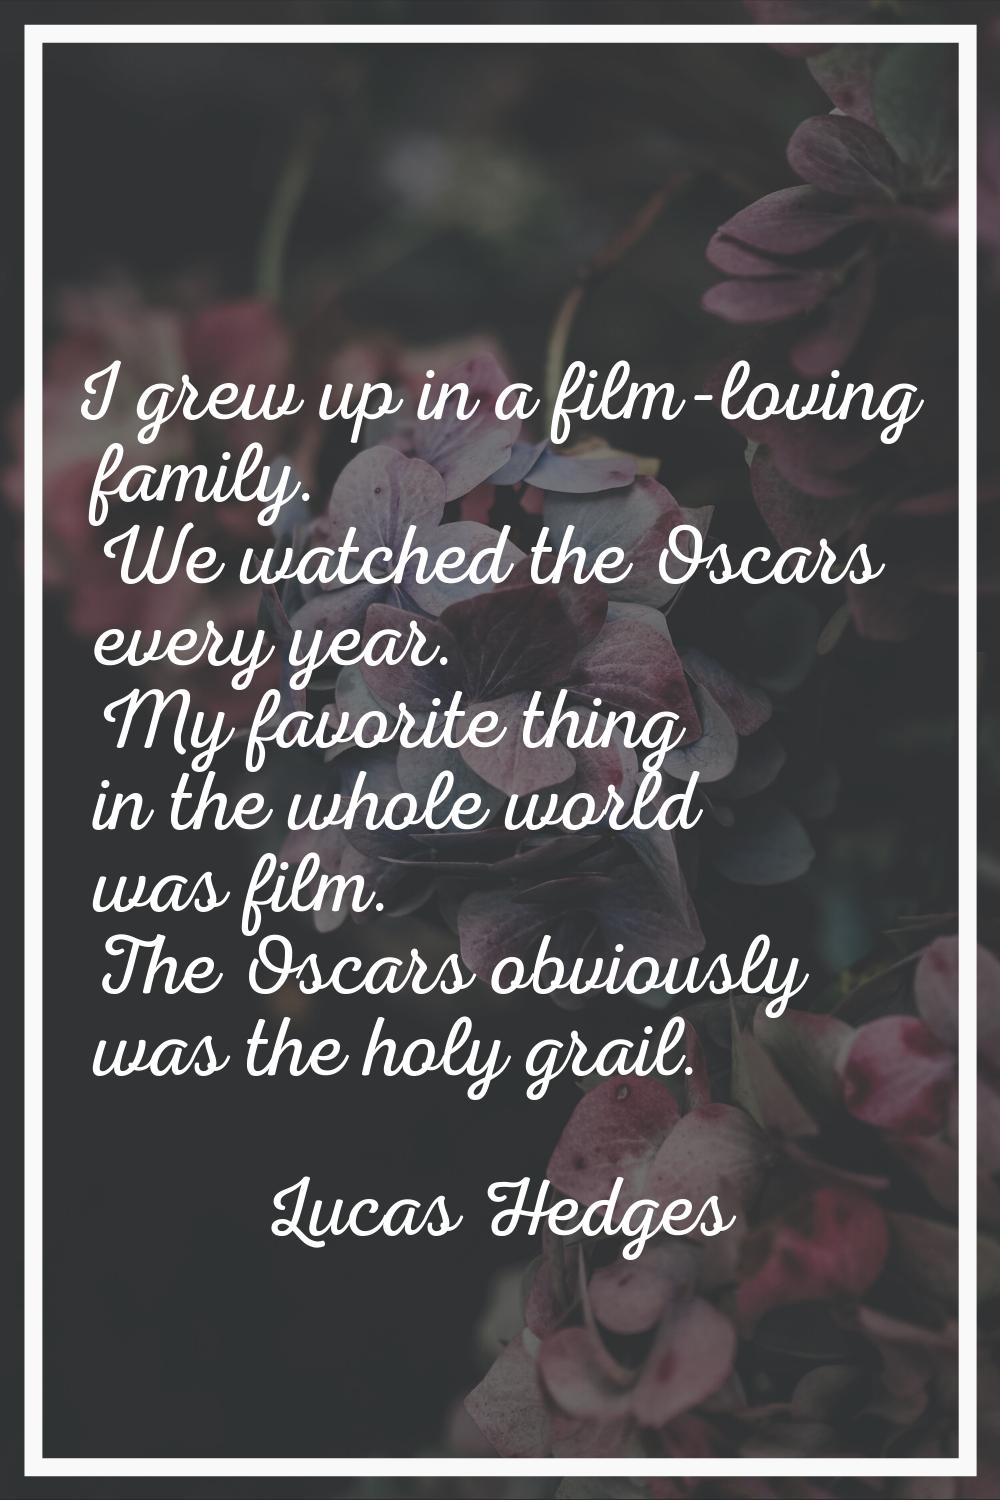 I grew up in a film-loving family. We watched the Oscars every year. My favorite thing in the whole